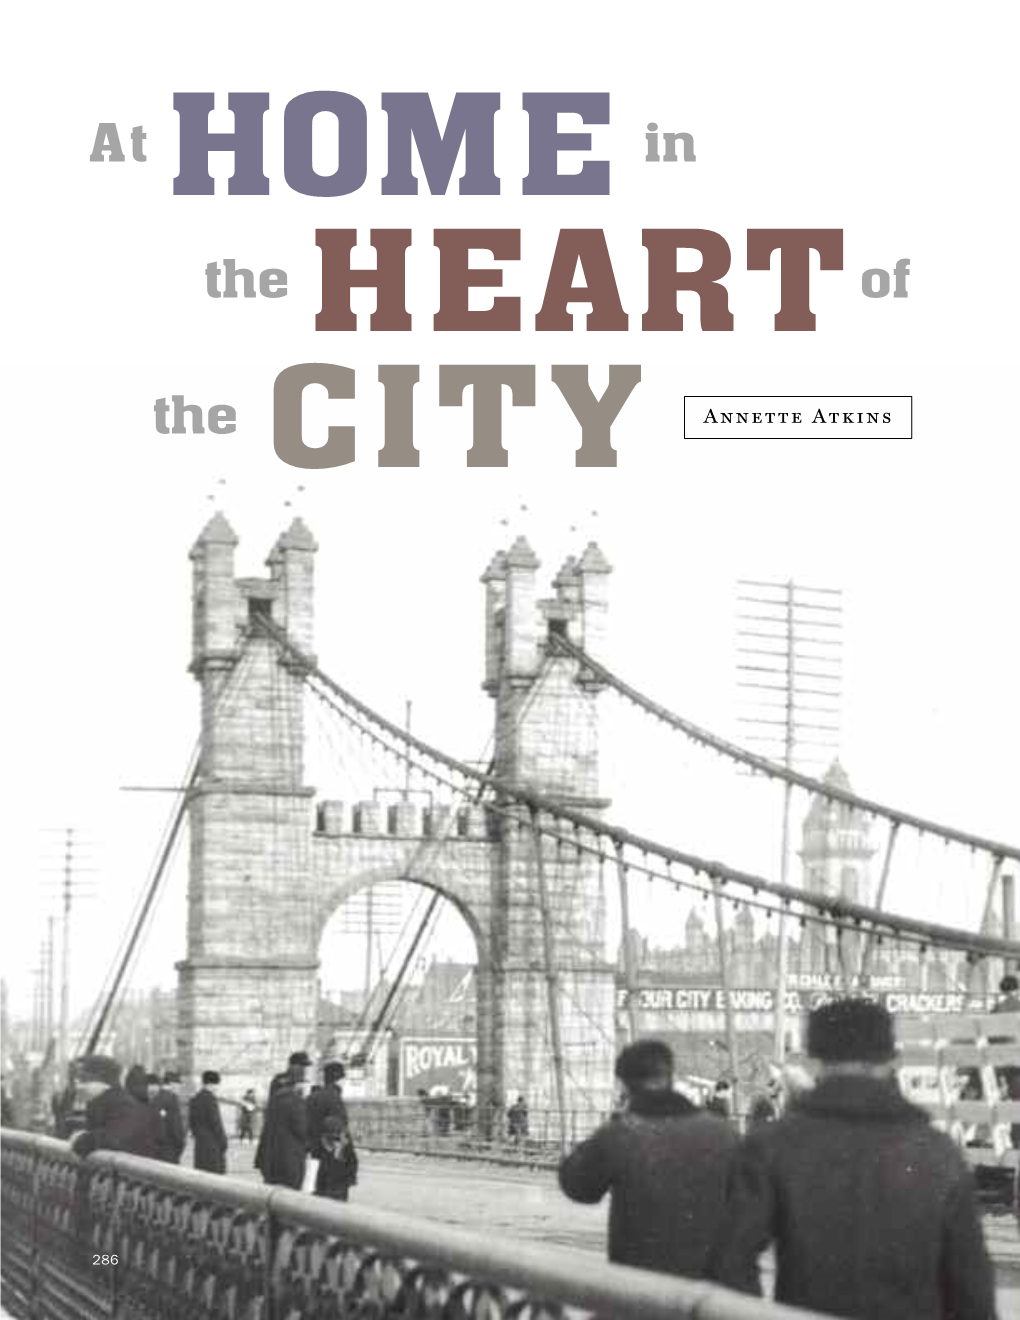 At Home in the Heart of the City / Annette Atkins